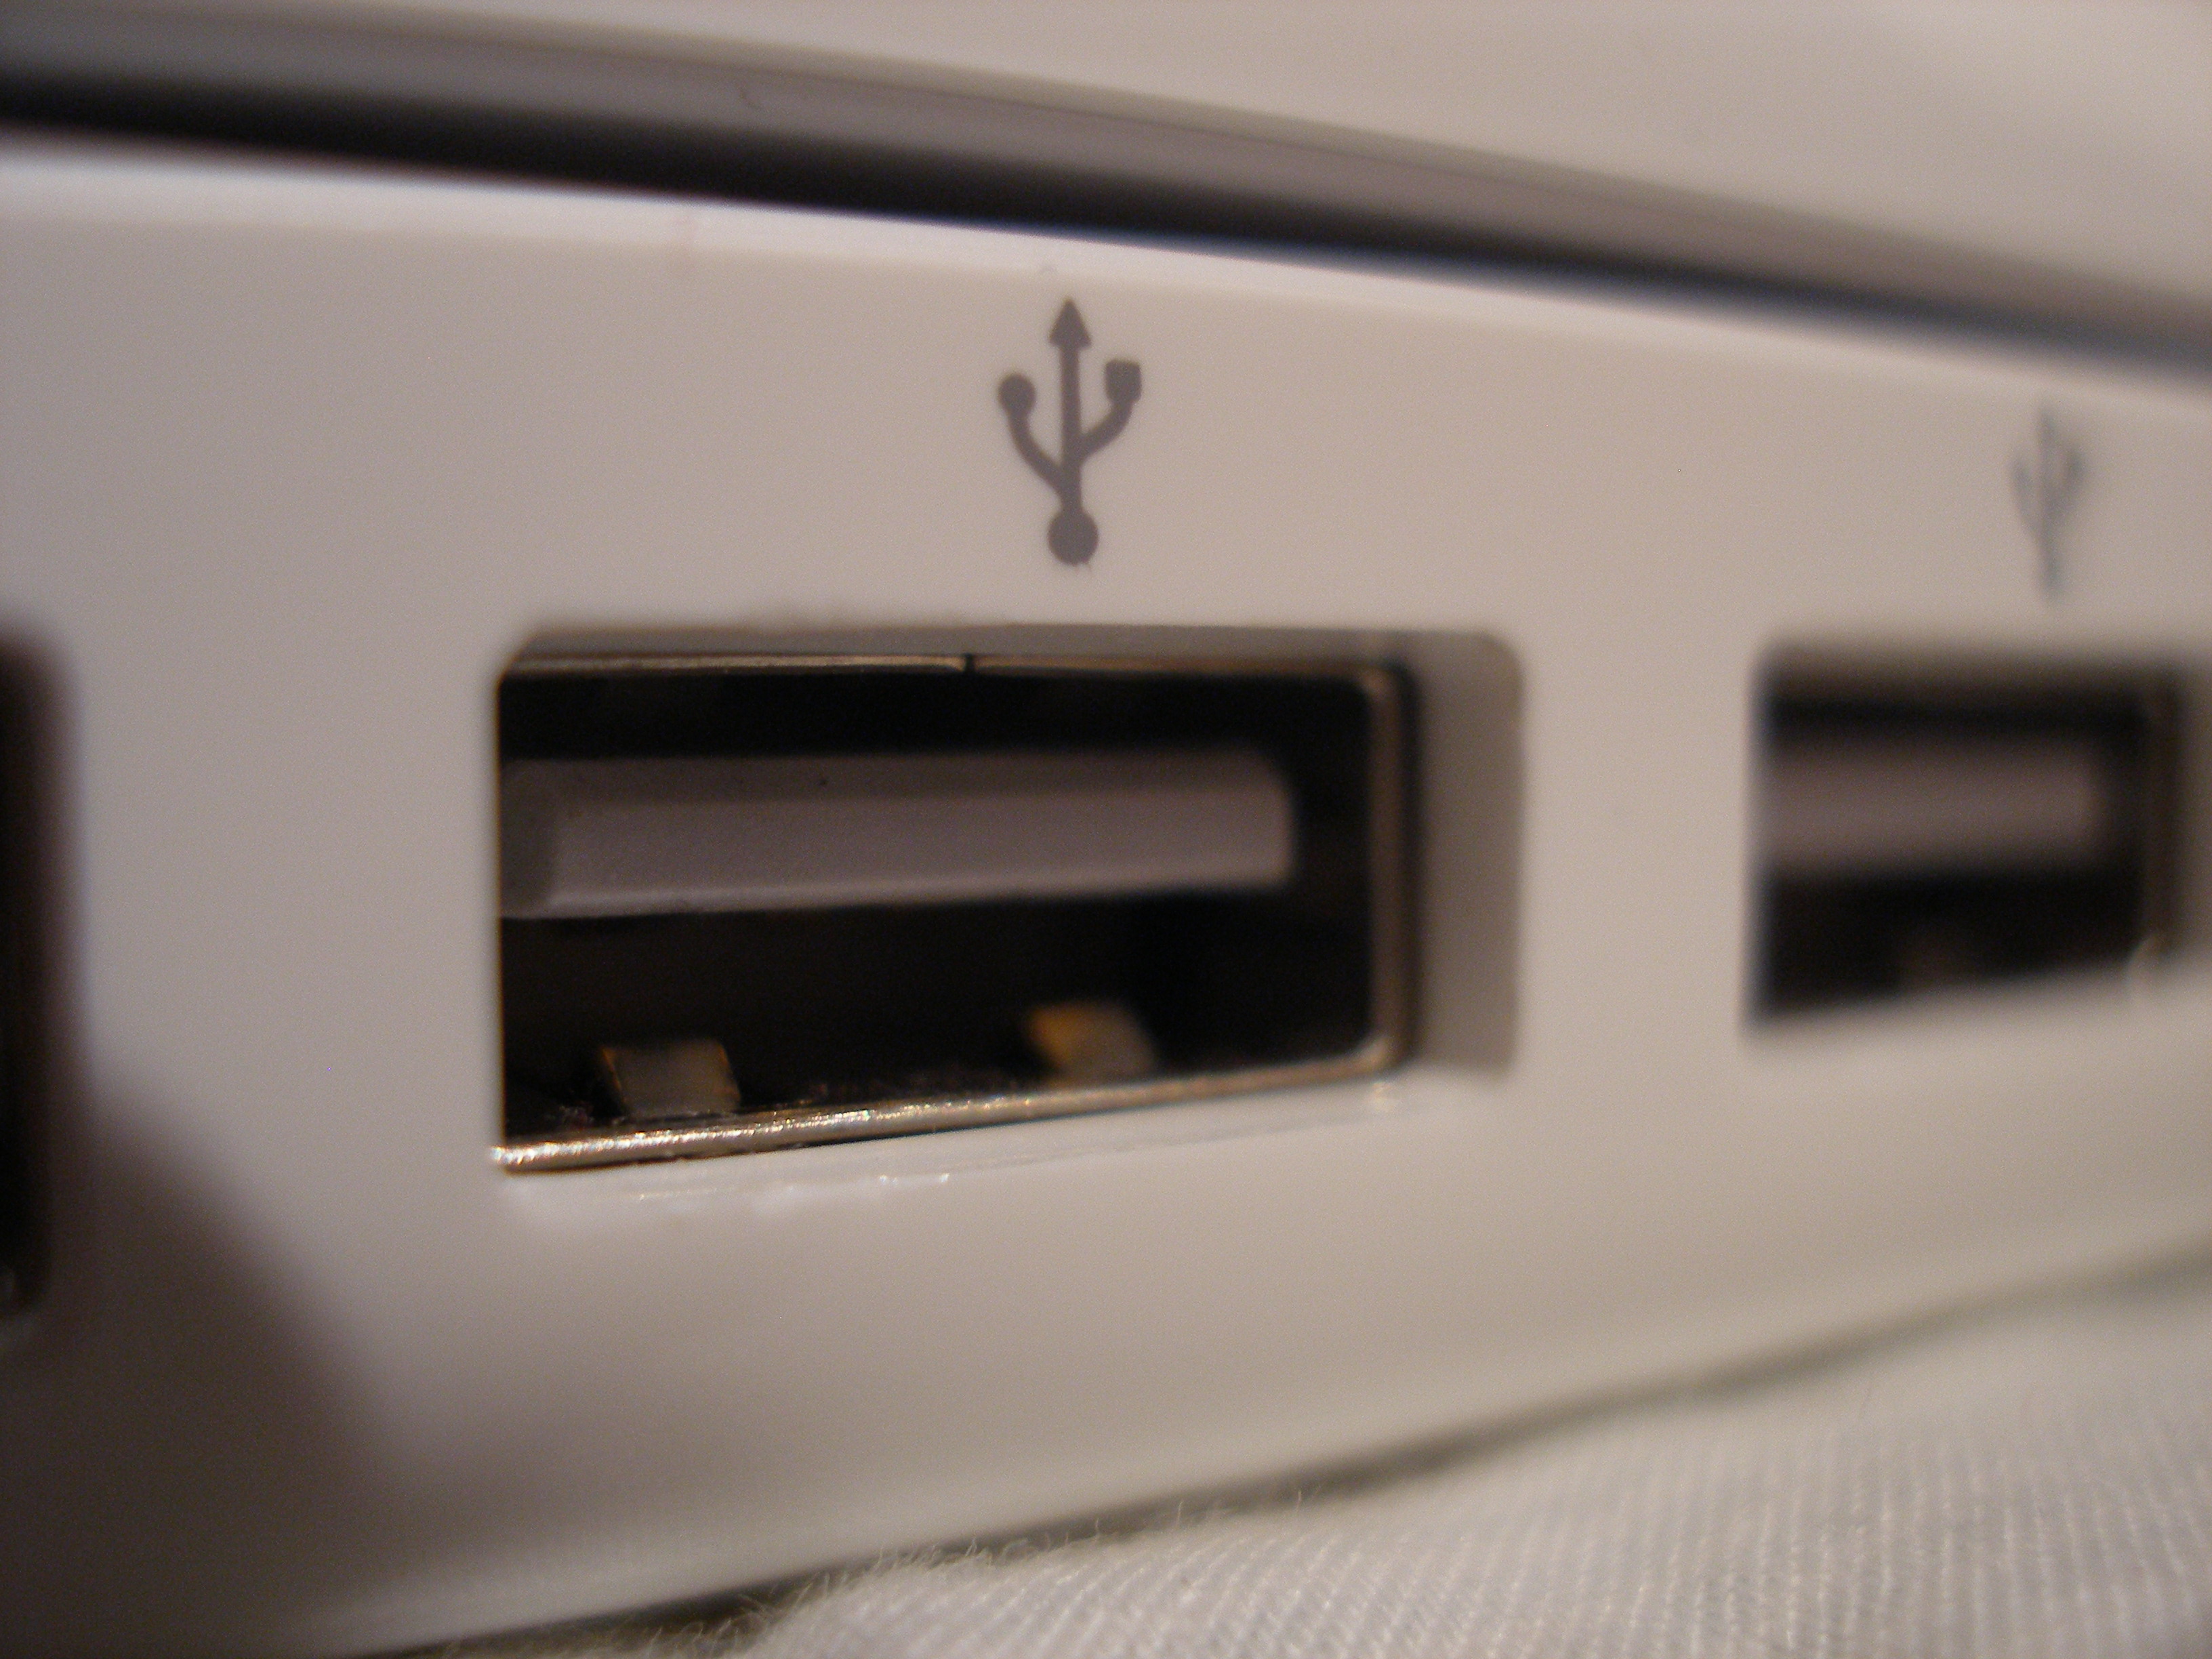 Ensure the USB device is properly plugged into a working USB port
Try using a different USB port on the computer